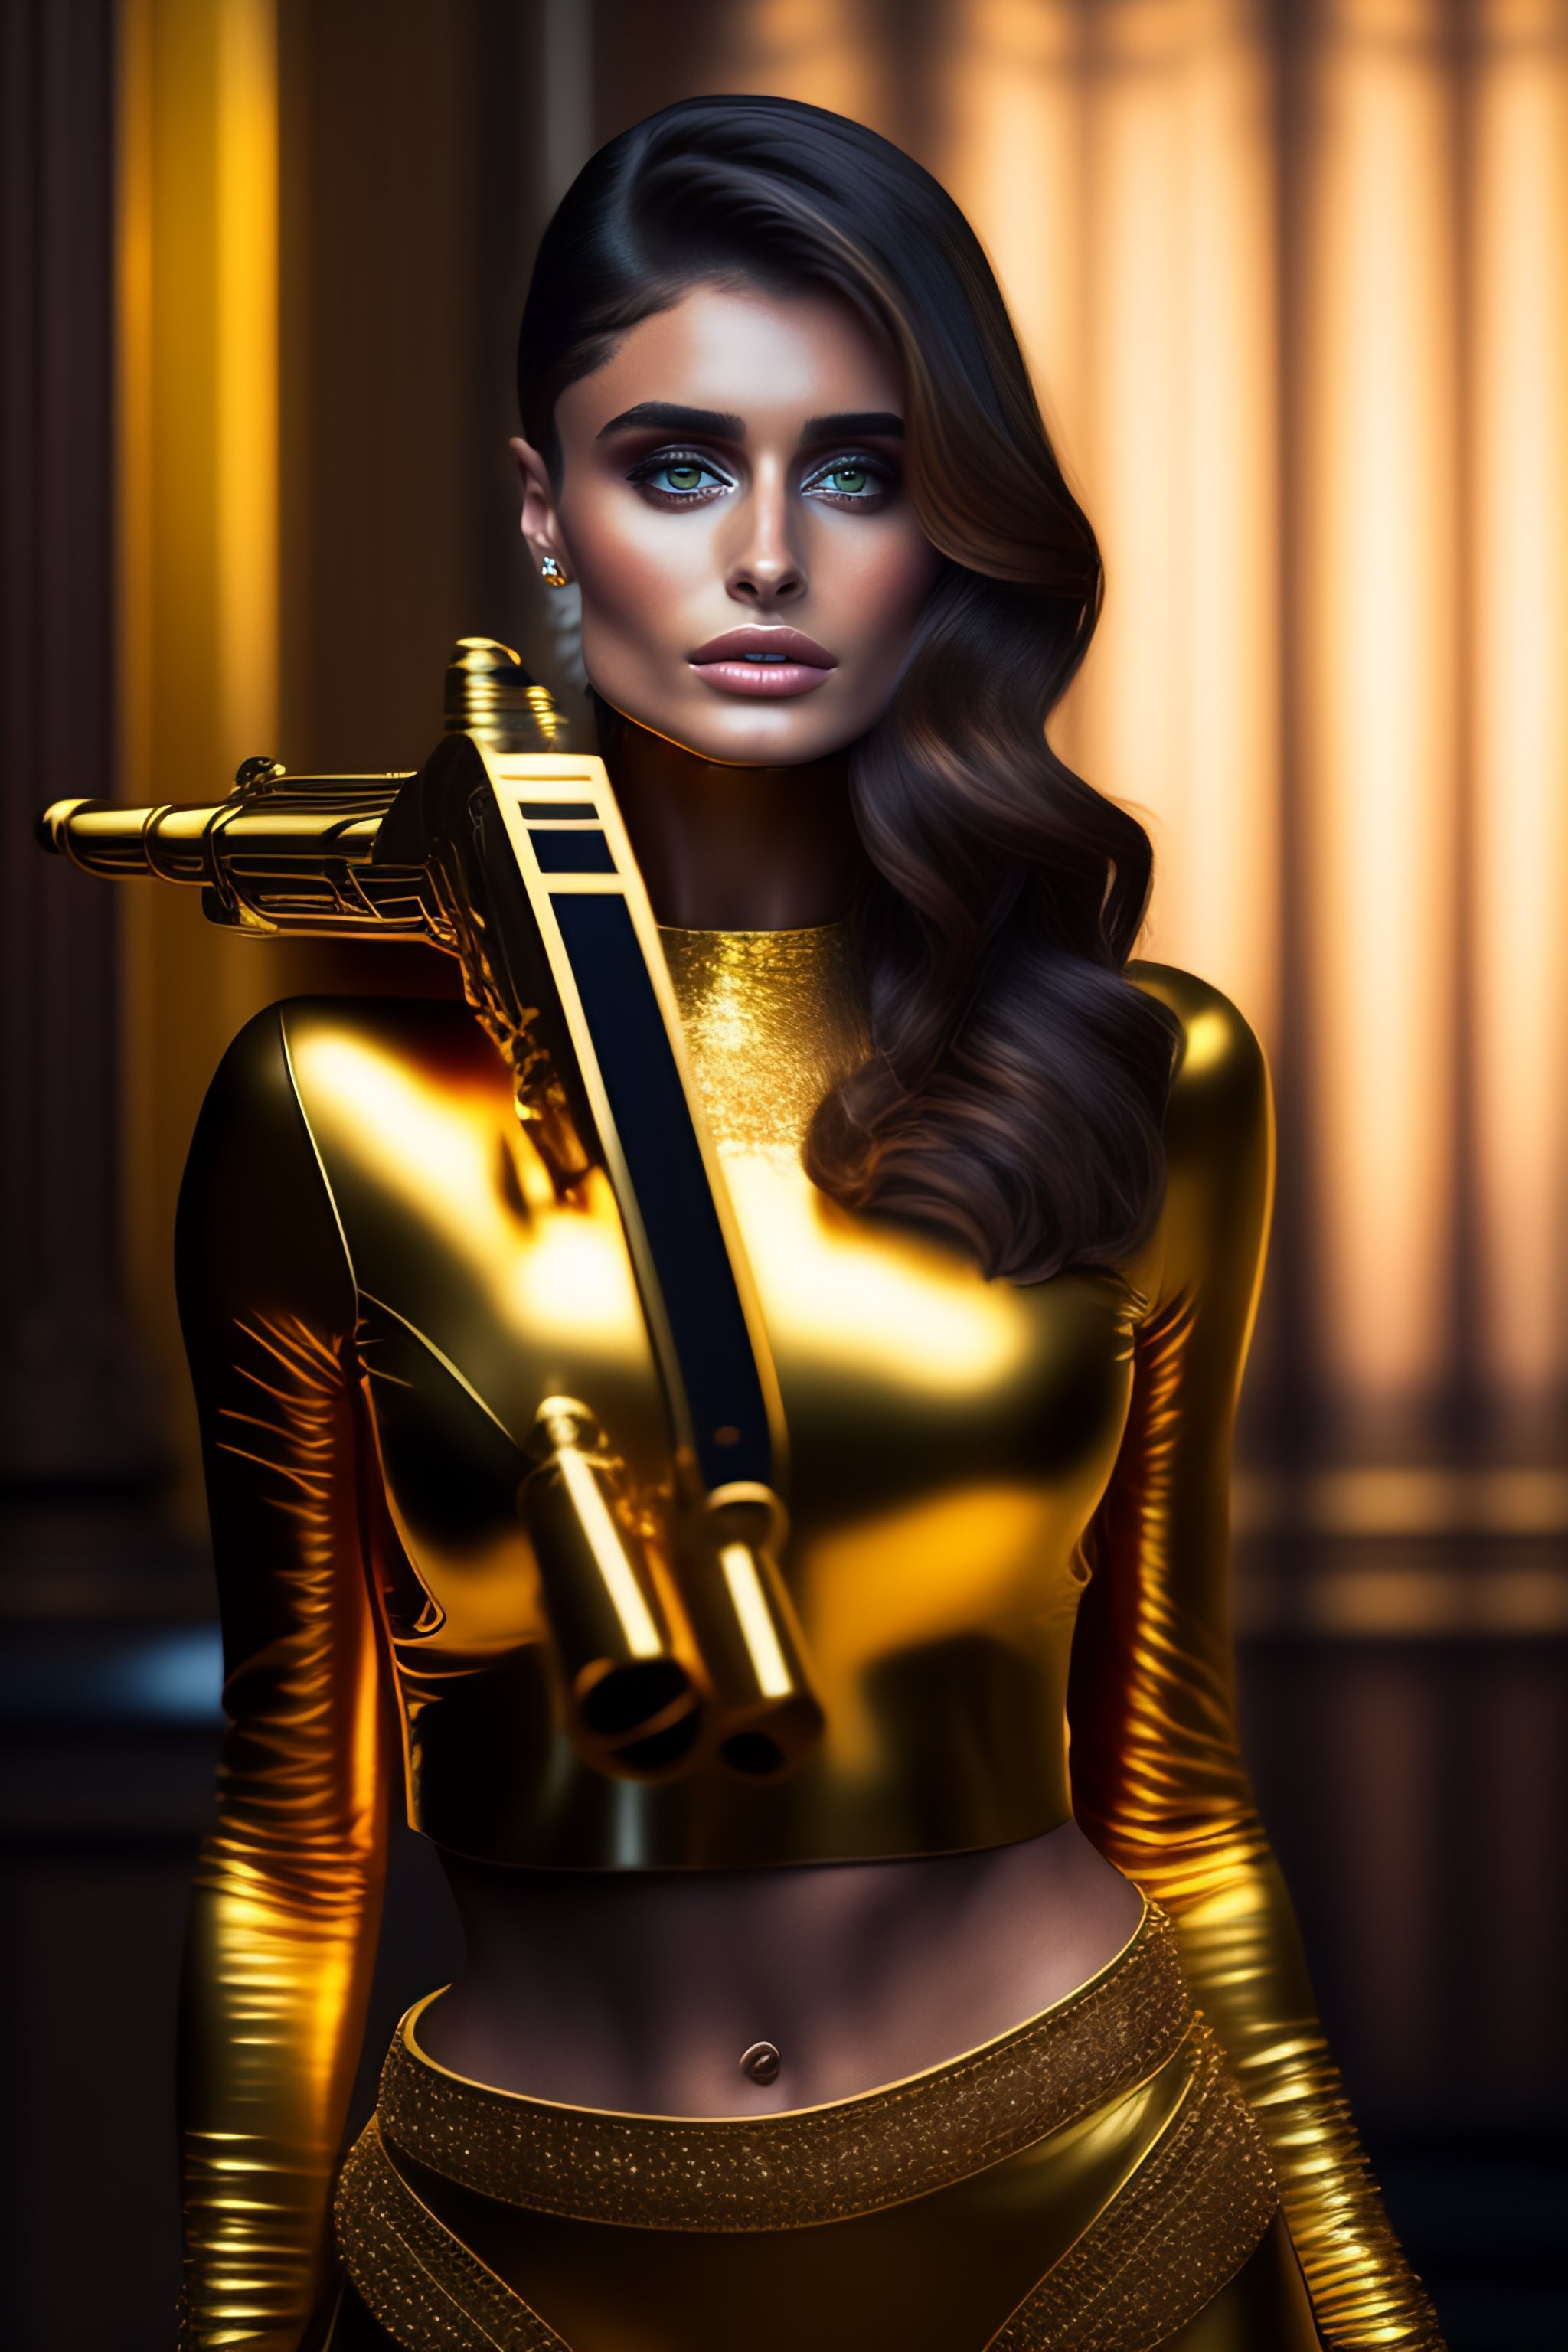 Lexica - taylor hill with a golden gun in her hands